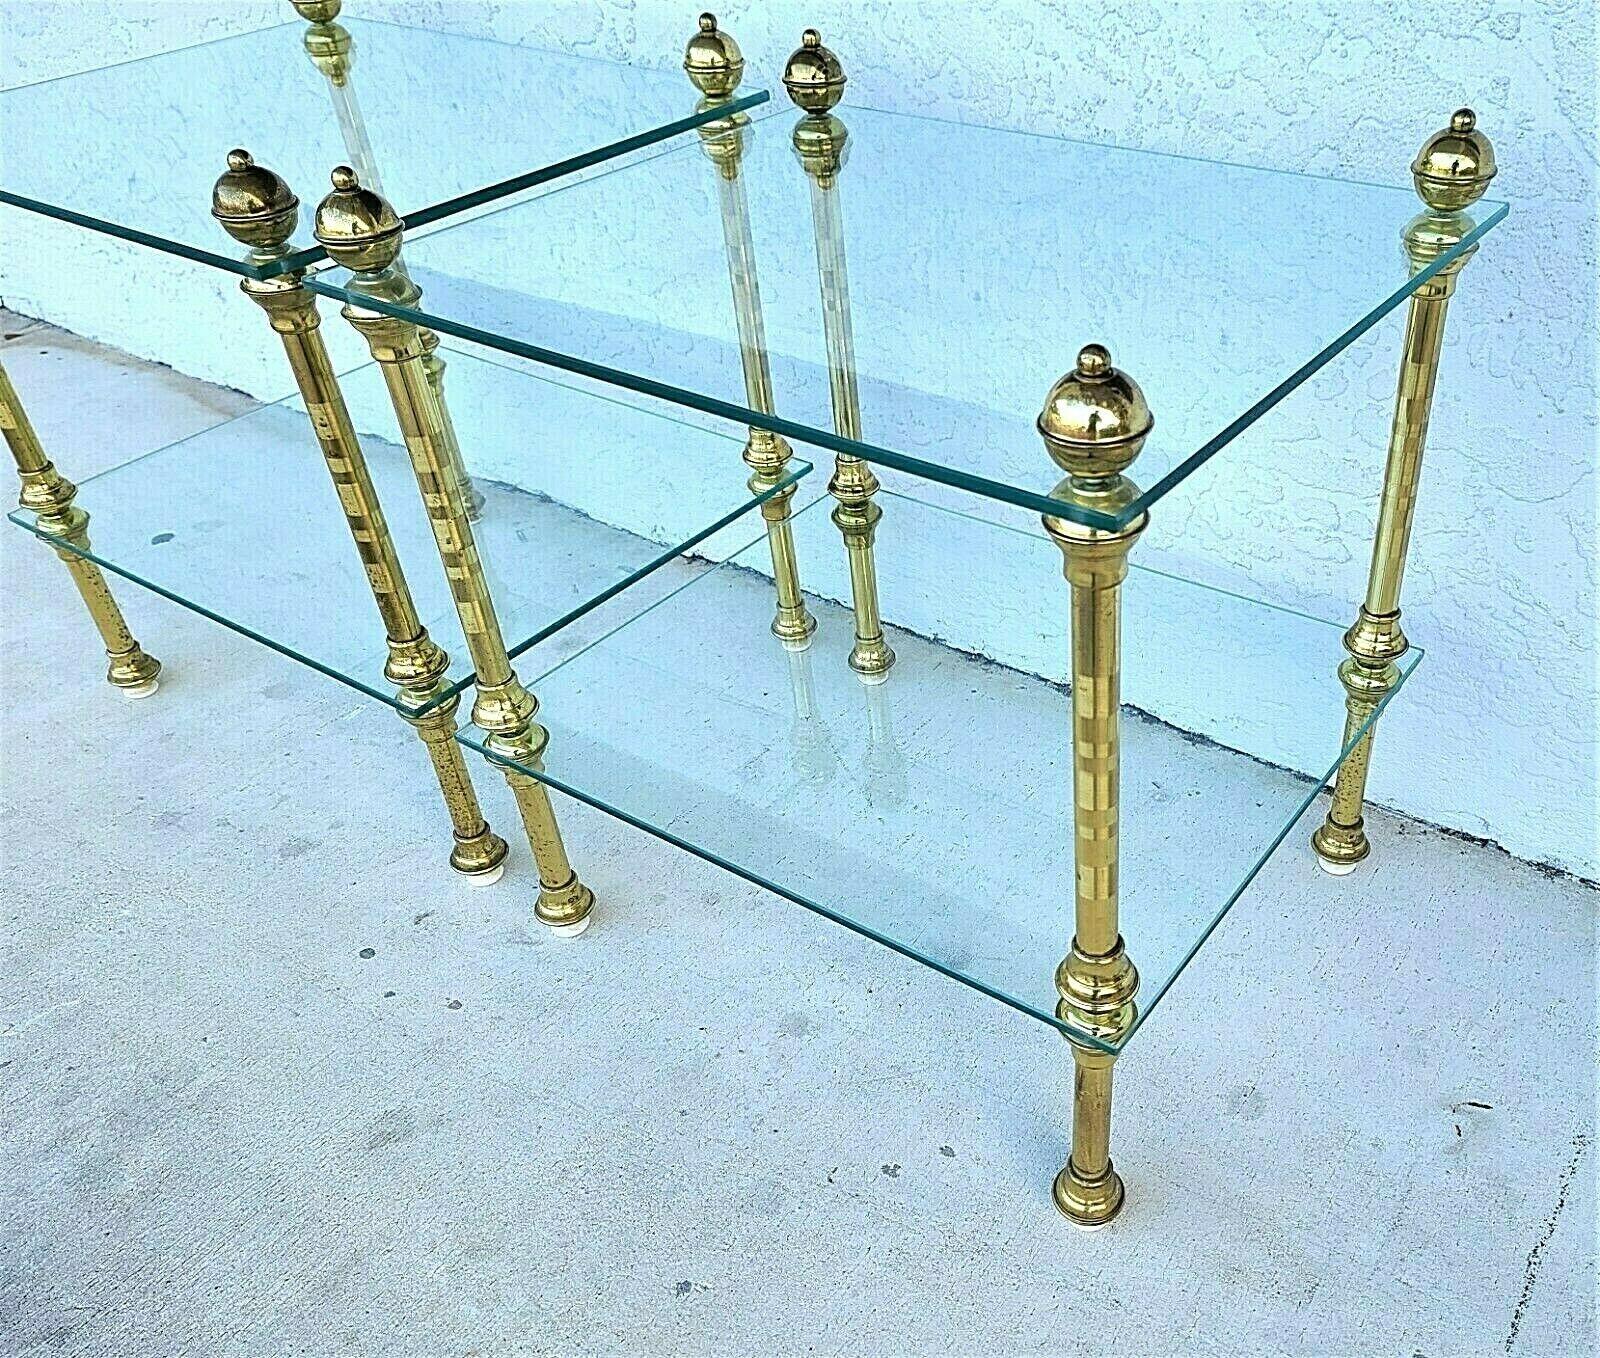 Offering one of our recent palm beach estate fine furniture acquisitions of a
Vintage pair of 2 tier brass & glass side end tables nightstands
Each leg has an adjustable leveler

Approximate measurements in Inches
23,5